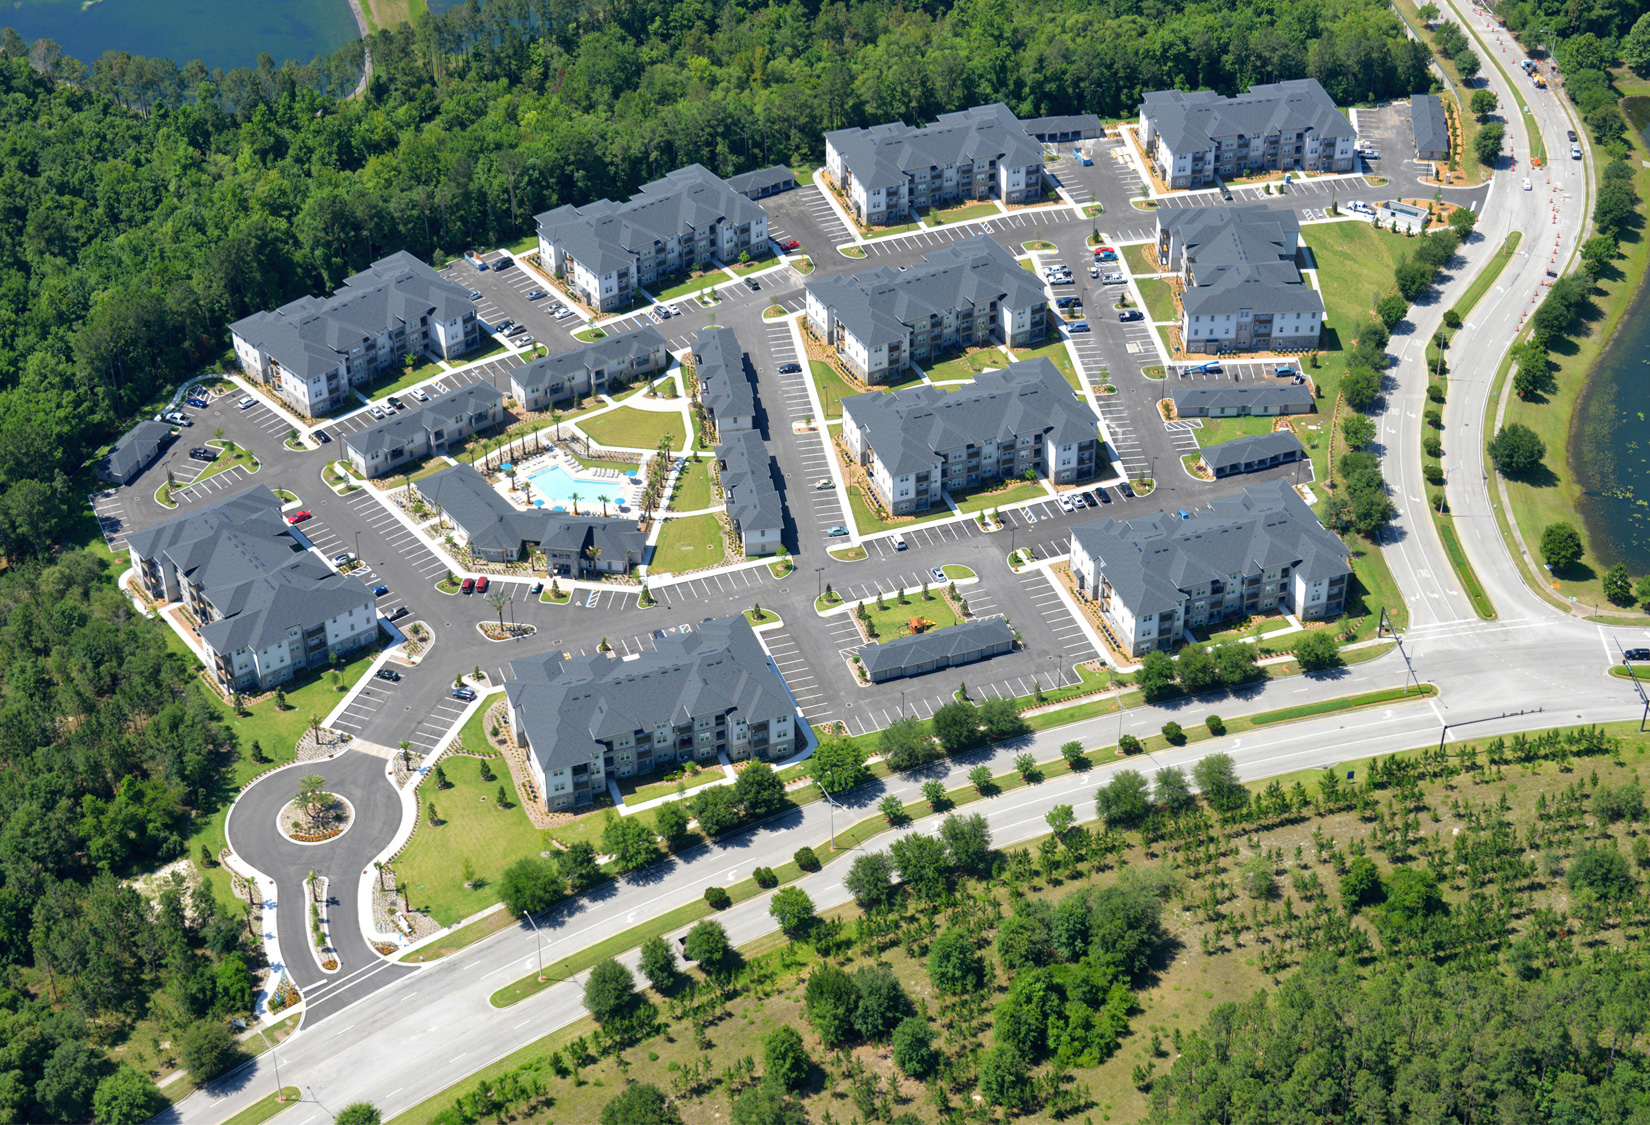 Gran Bay Apartments aerial view of complex and parking lot